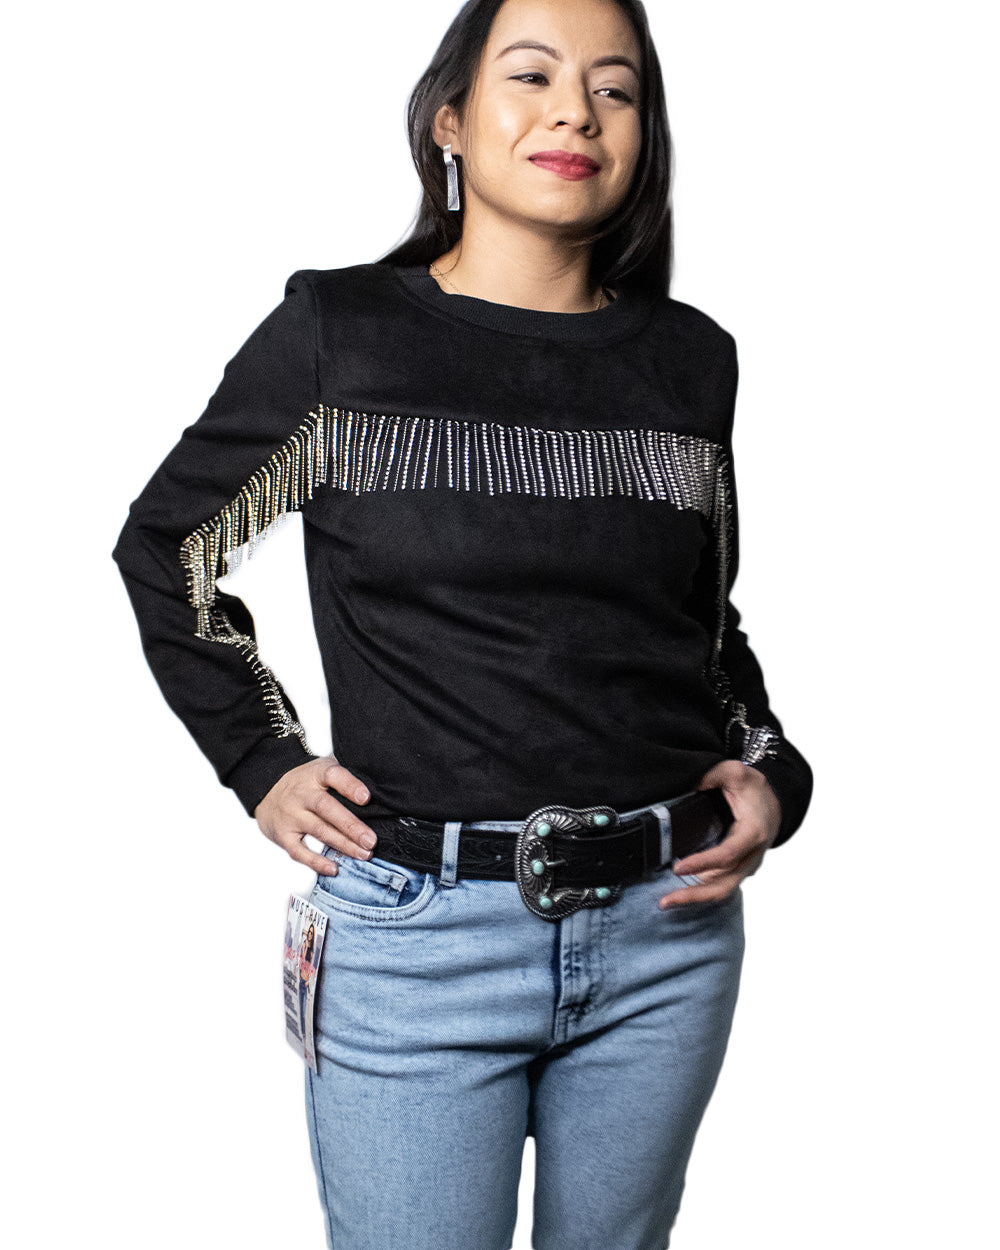 Black Suede Sweater with diamond fringe detail